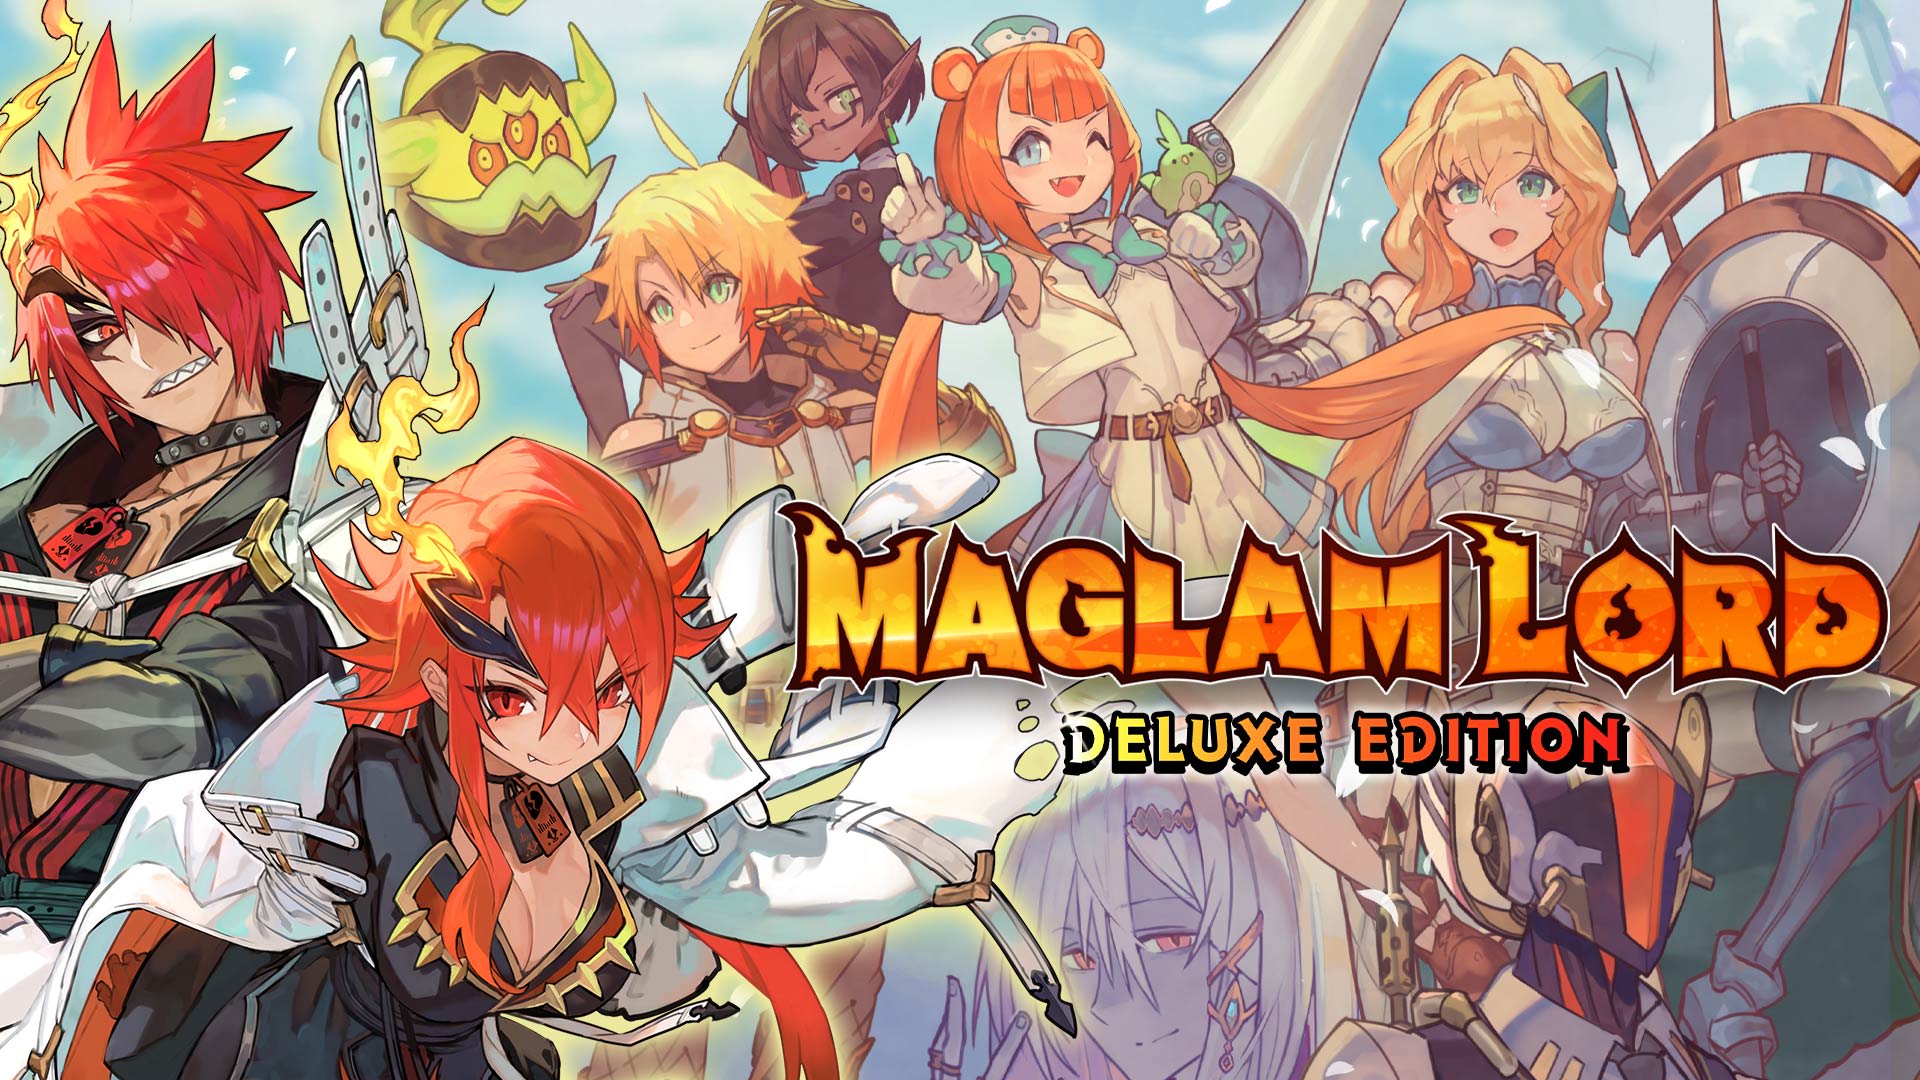 MAGLAM LORD: Deluxe Edition 1